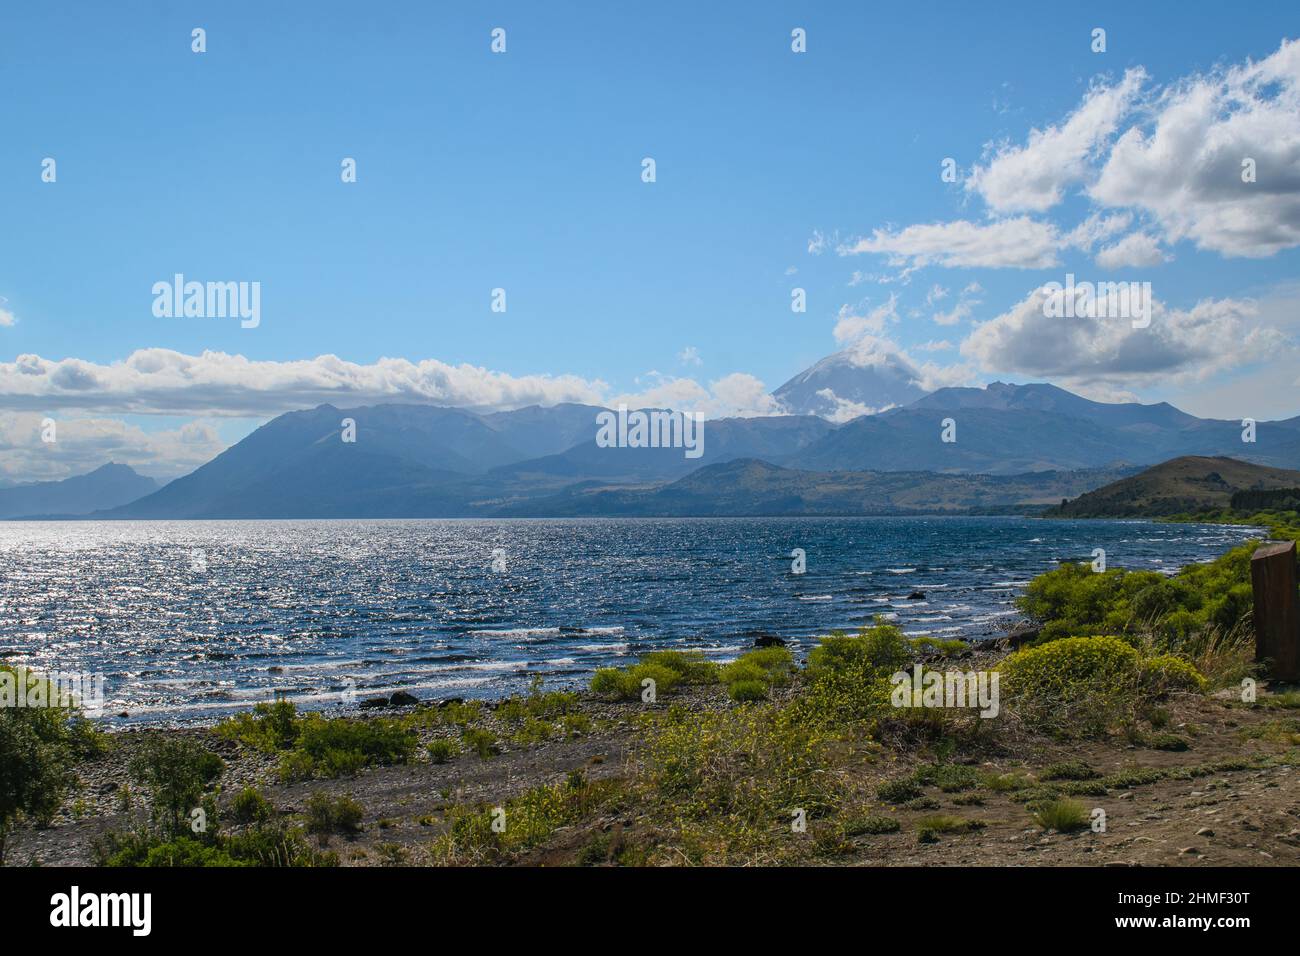 Huechulafquen Lake in the Patagonian Andes, mountain range with the Lanin volcano in the background. Stock Photo